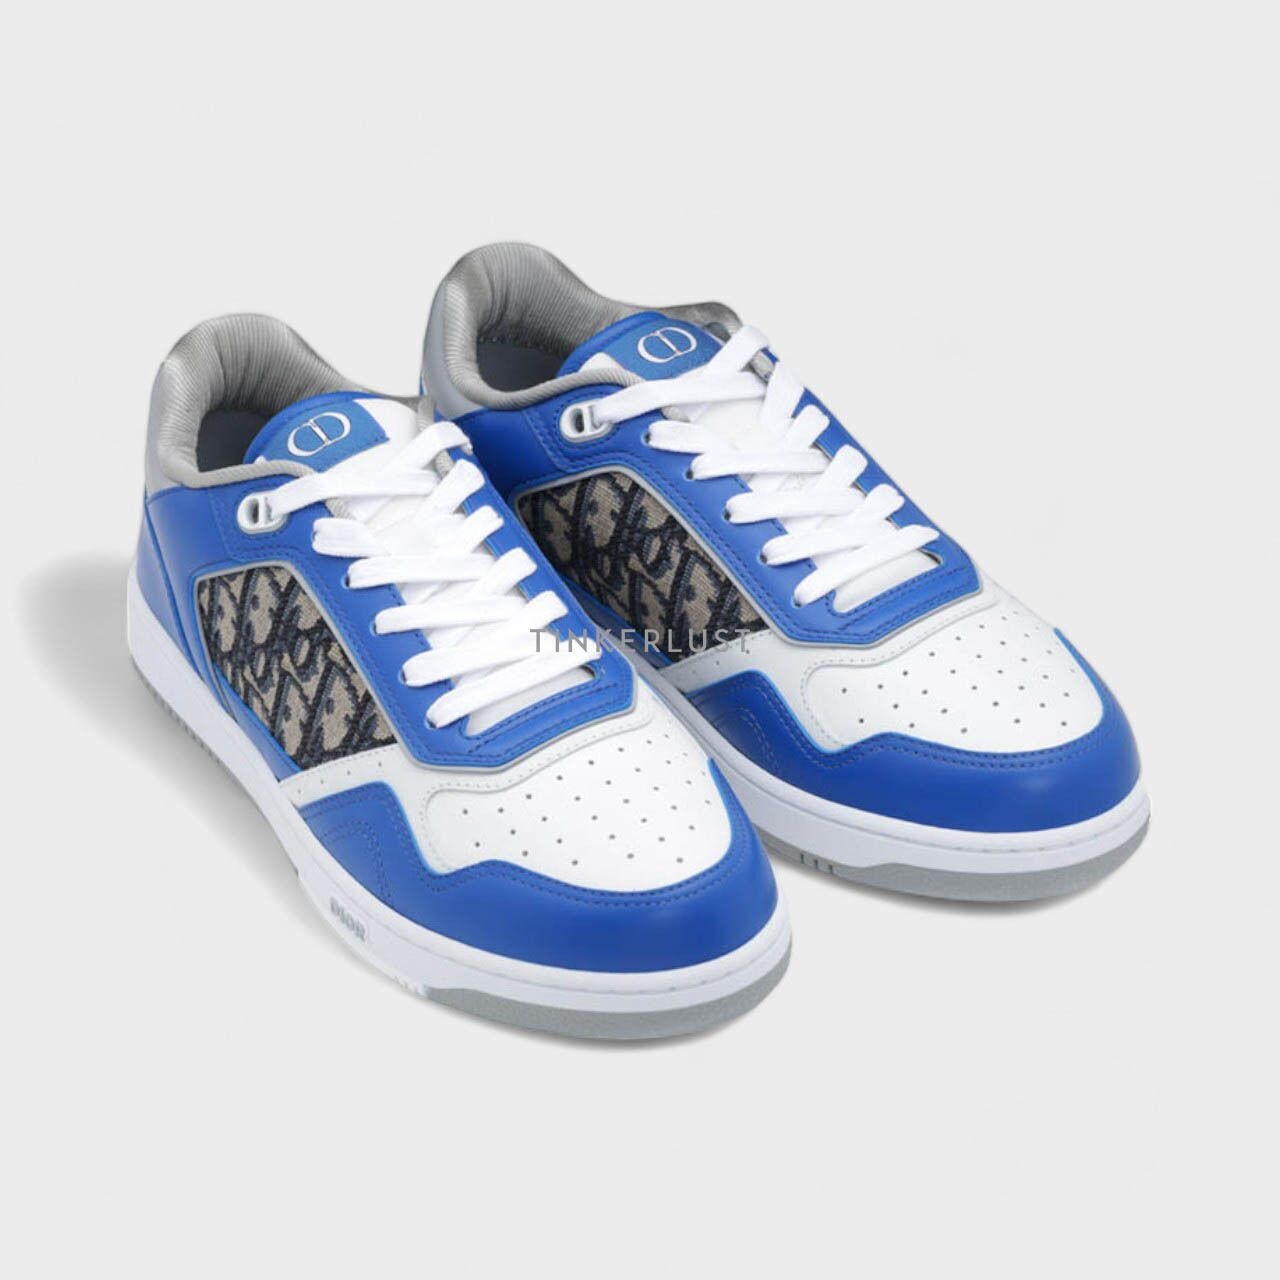 Christian Dior B27 Oblique Low Top Blue/Gray/White Sneakers